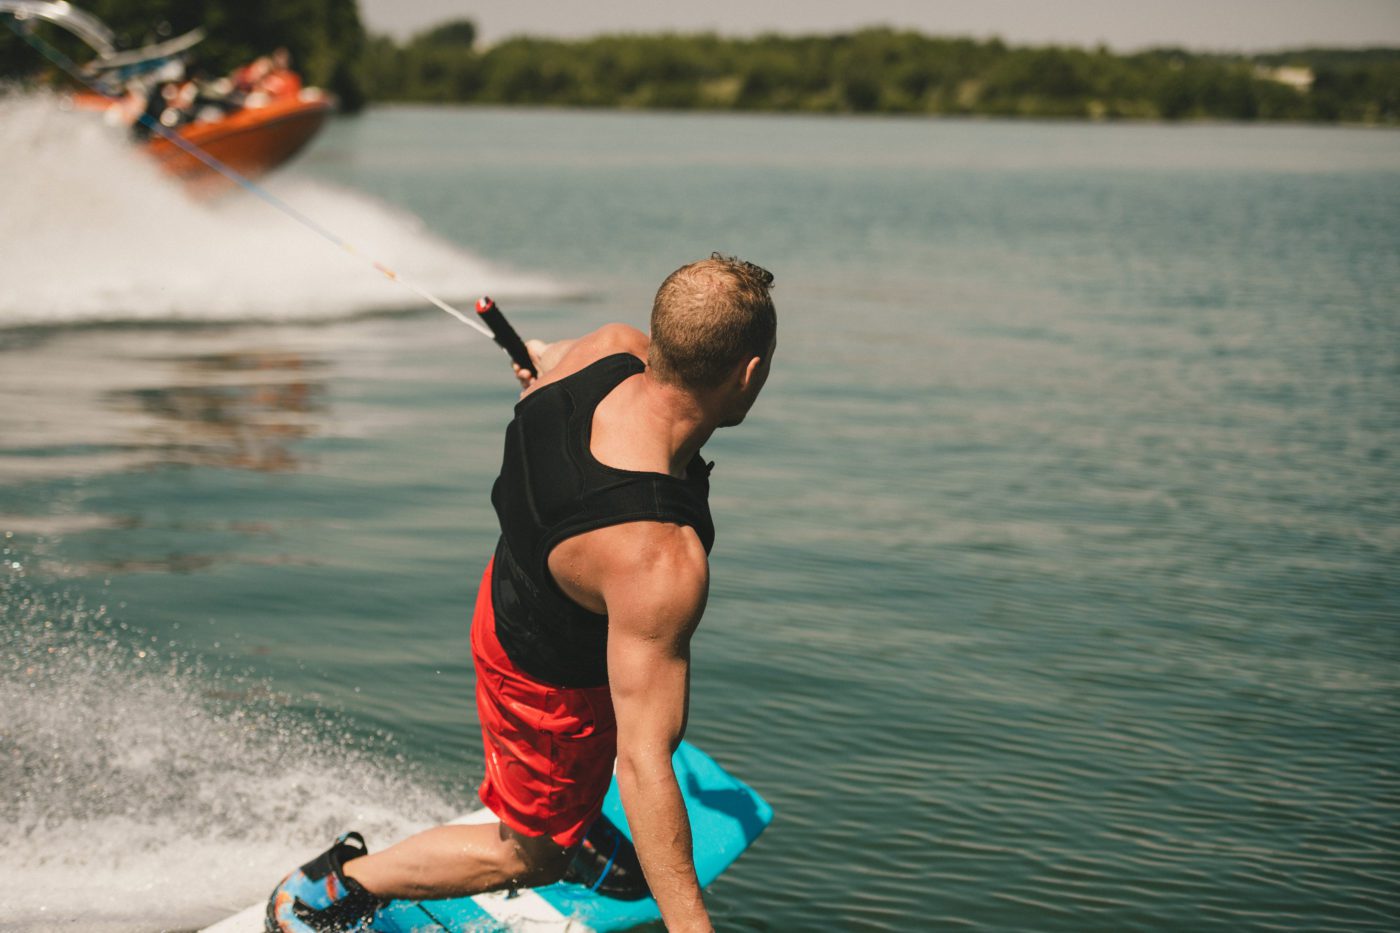 Wake boarding in action